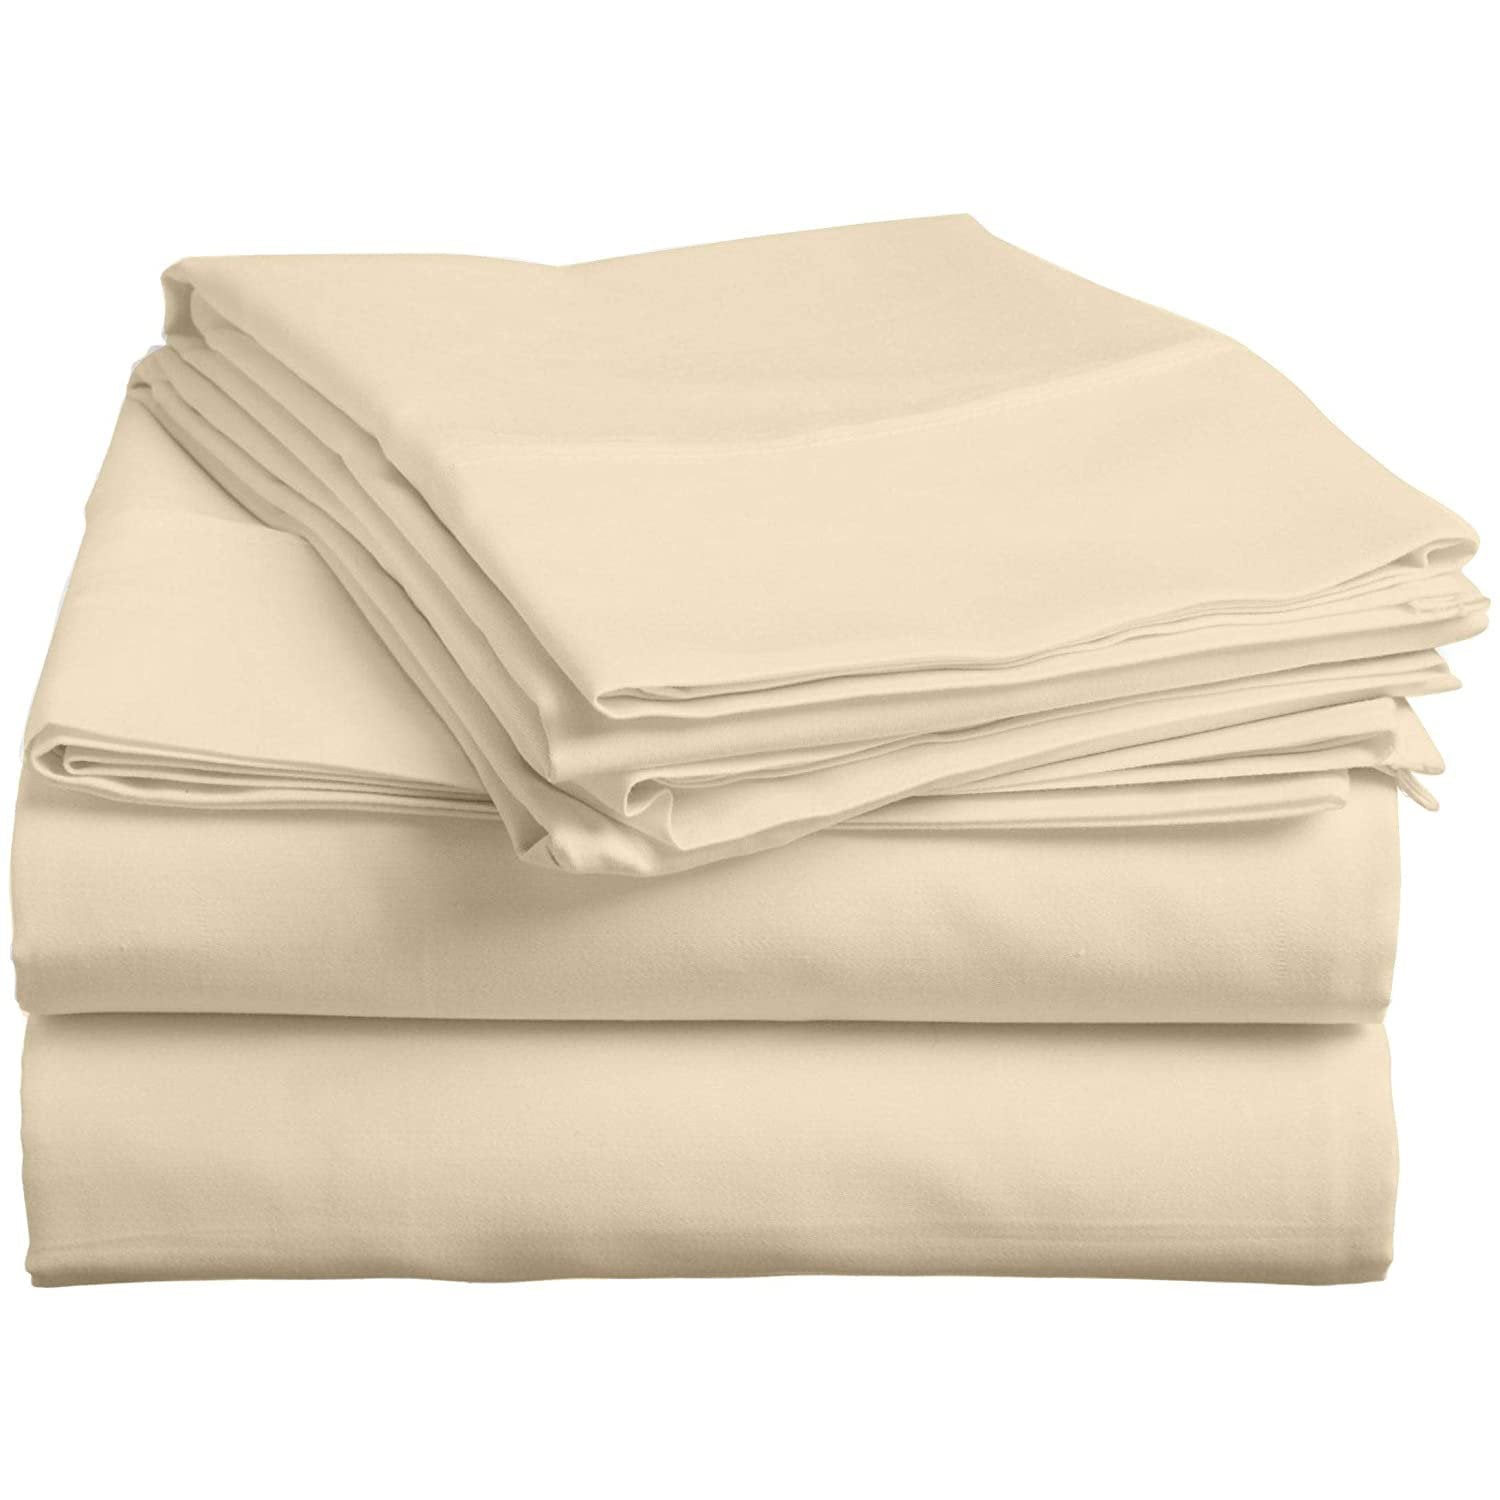 Bedding Series 600-Thread Count Egyptian Cotton Luxurious 4-PCs - Sheet Set, Fits Easily Fit upto 9-12" Inch Deep Pockets Solid Pattern ( Queen, Ivory/Cream )